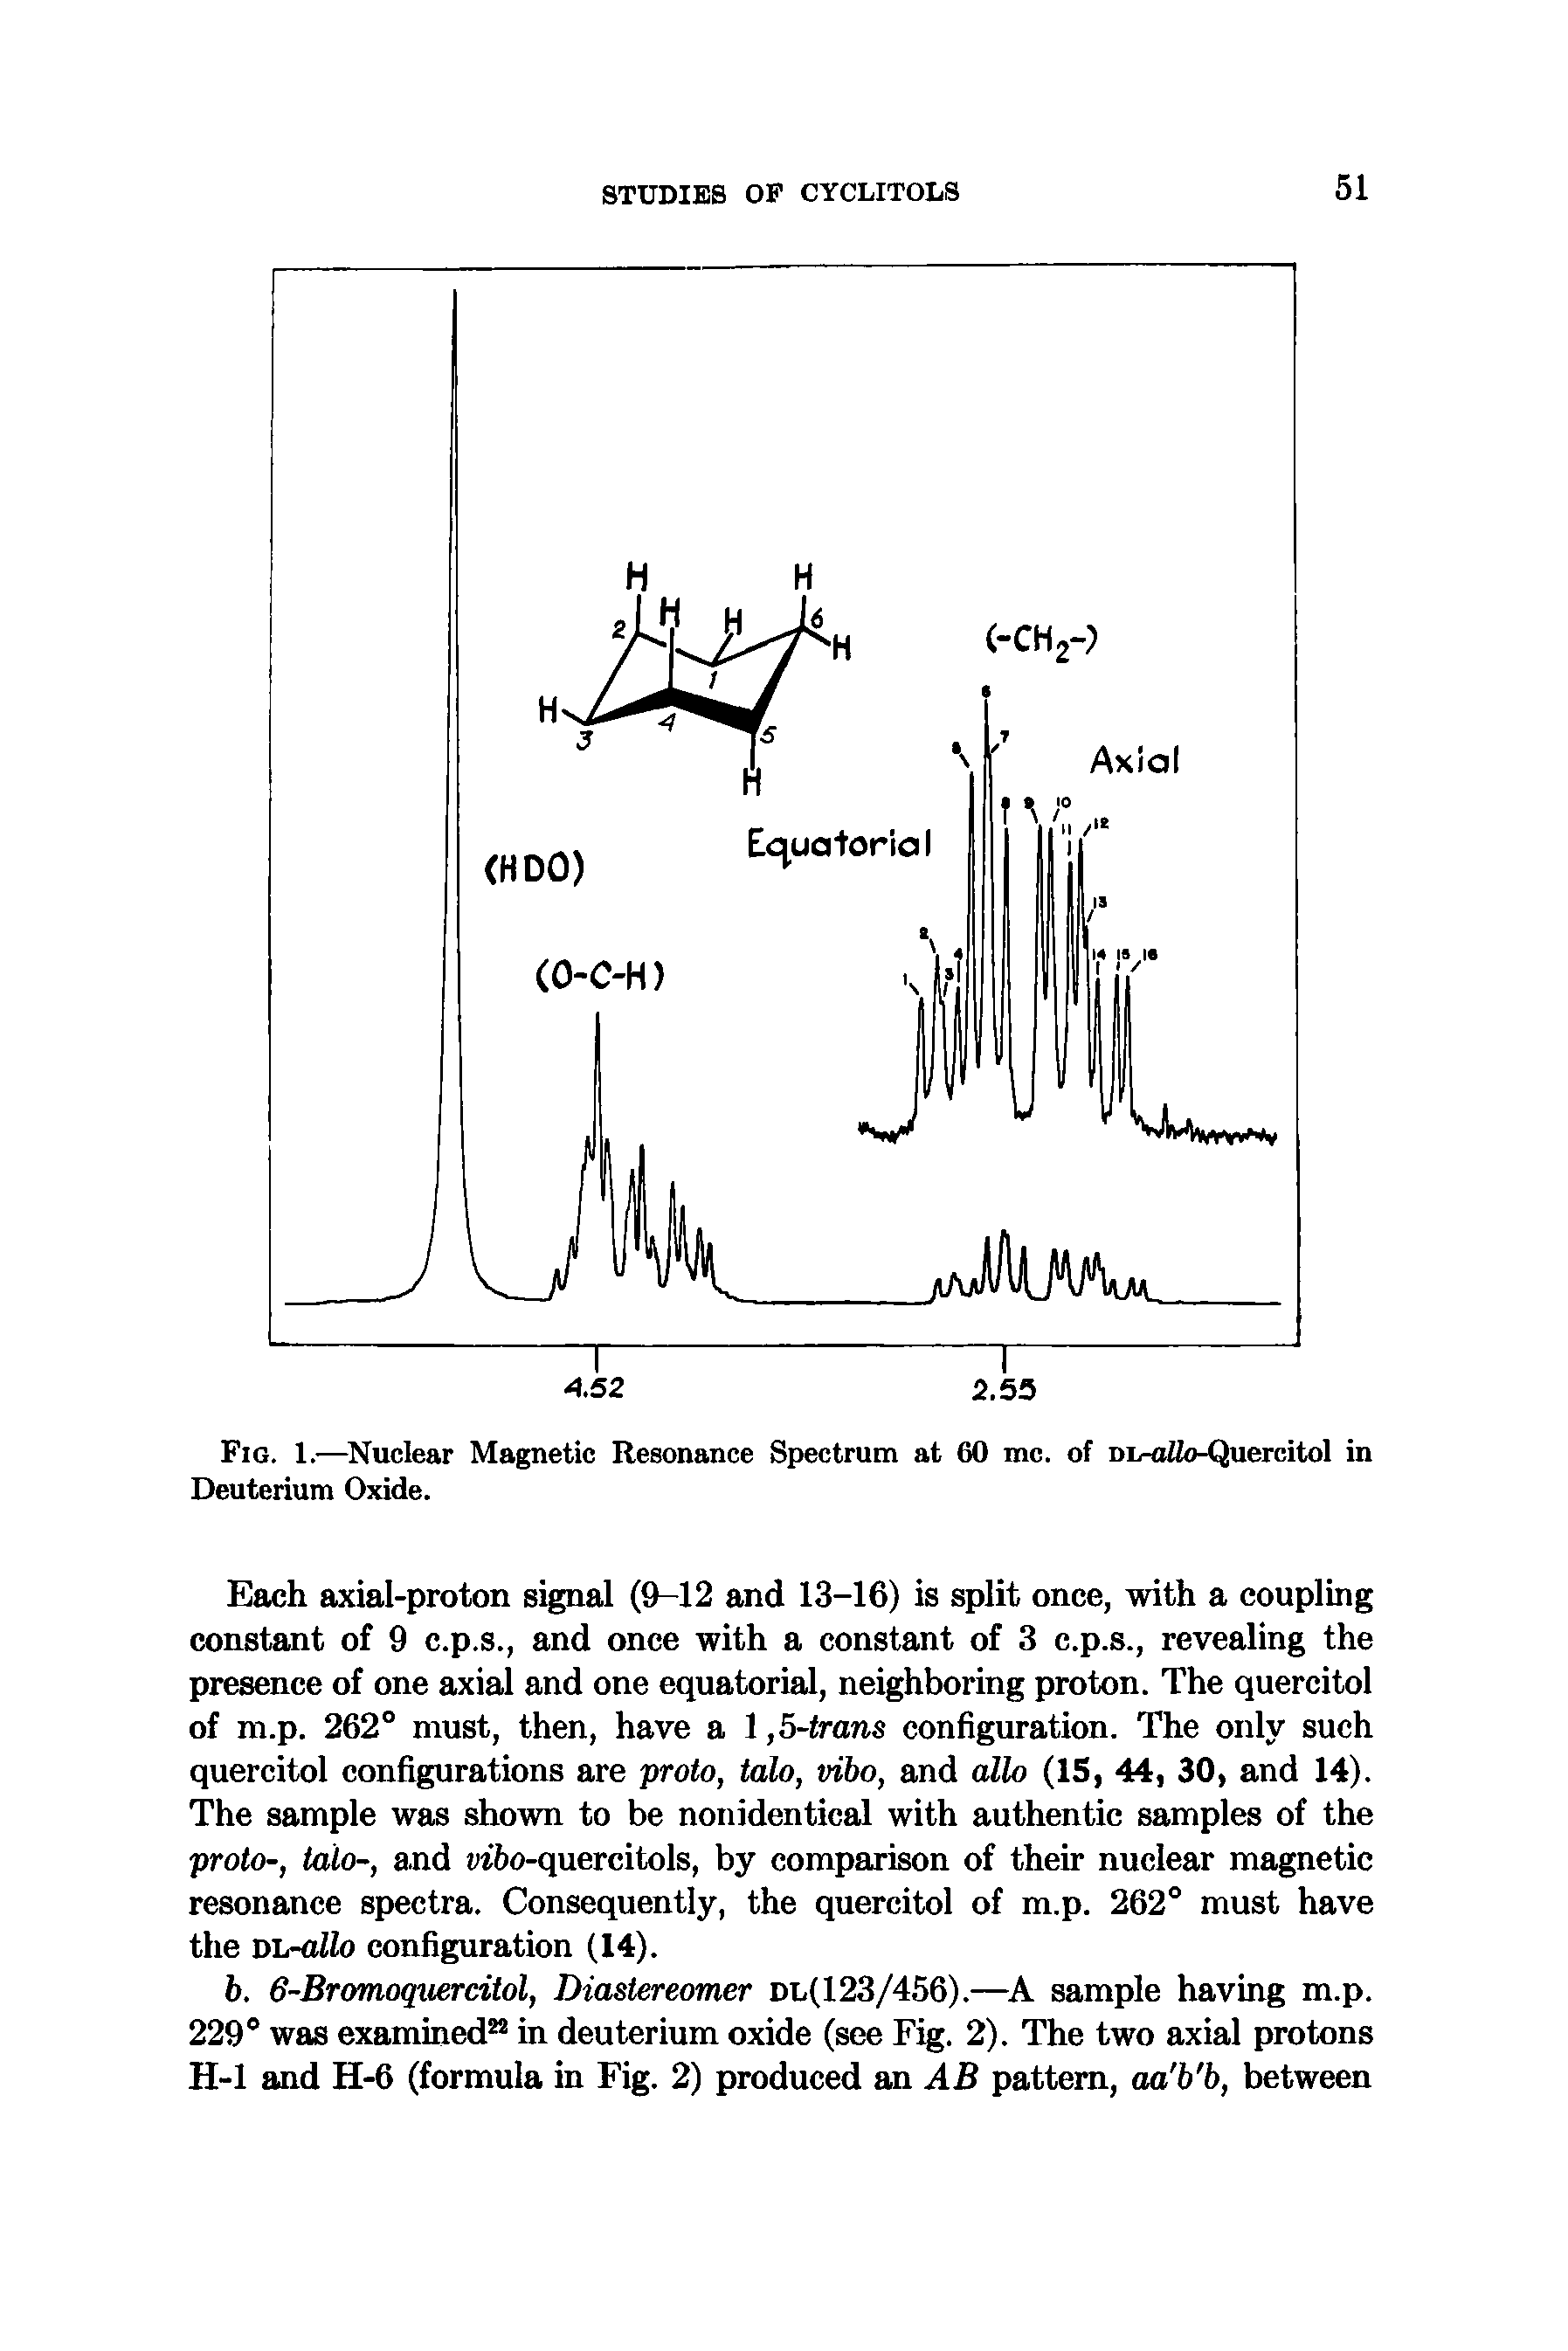 Fig. 1.— Nuclear Magnetic Resonance Spectrum at 60 me. of nii-oZZo-Quercitol in Deuterium Oxide.